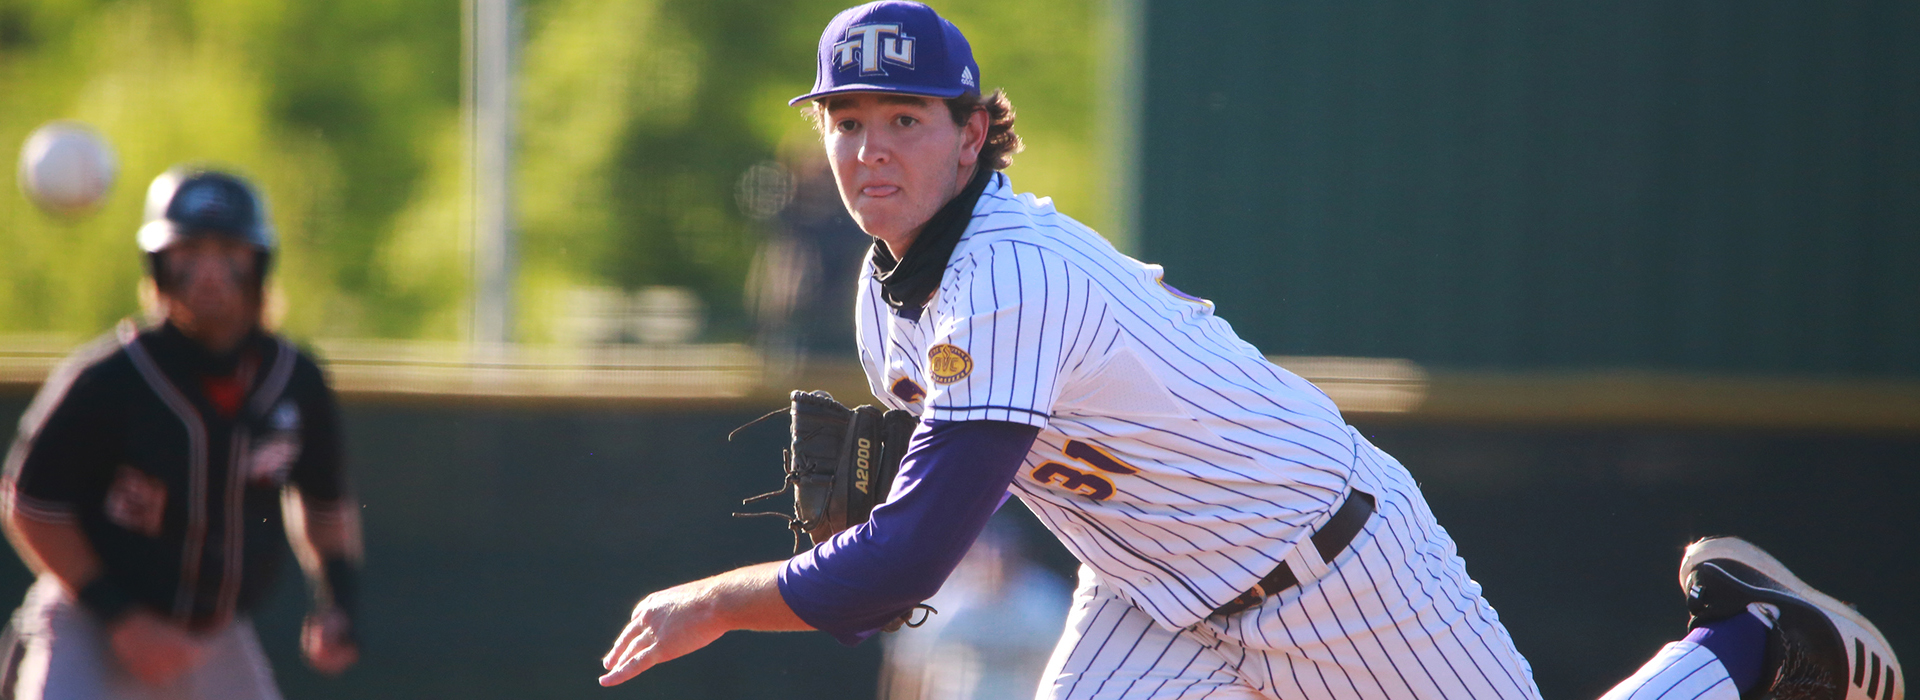 Senior-backed offense, Fisher's complete game lift Tech past SIUE on Senior Night